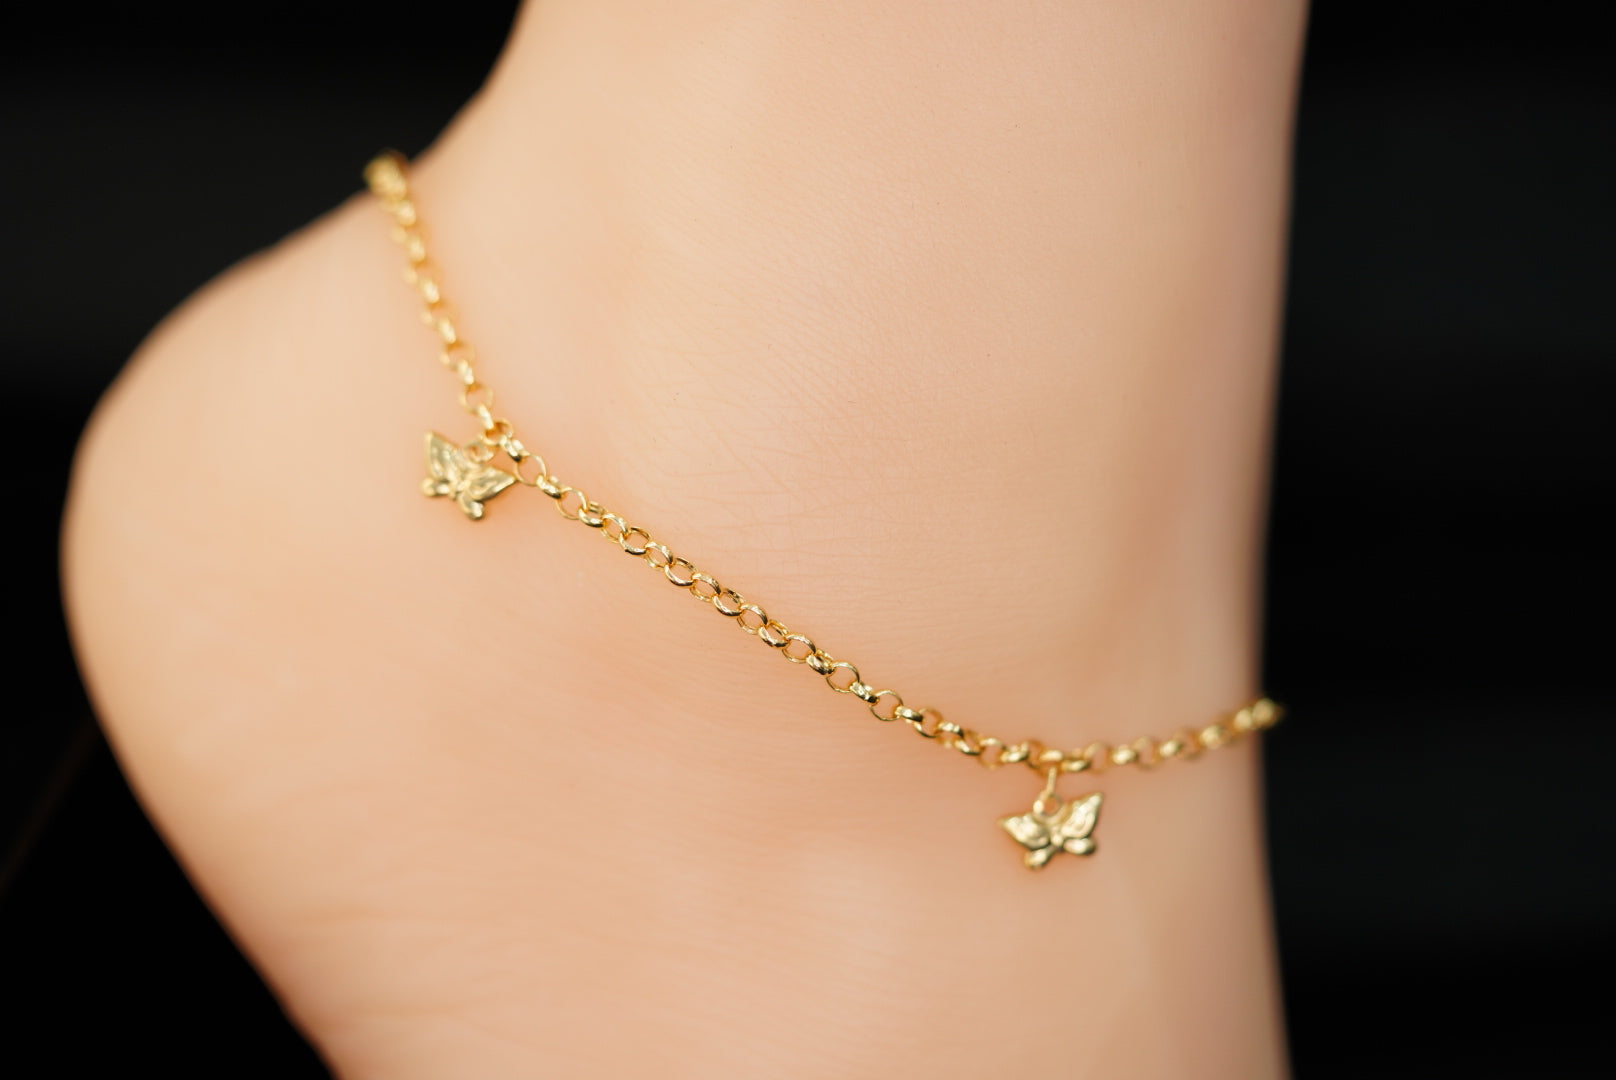 14k Rolo with Charms Ankle